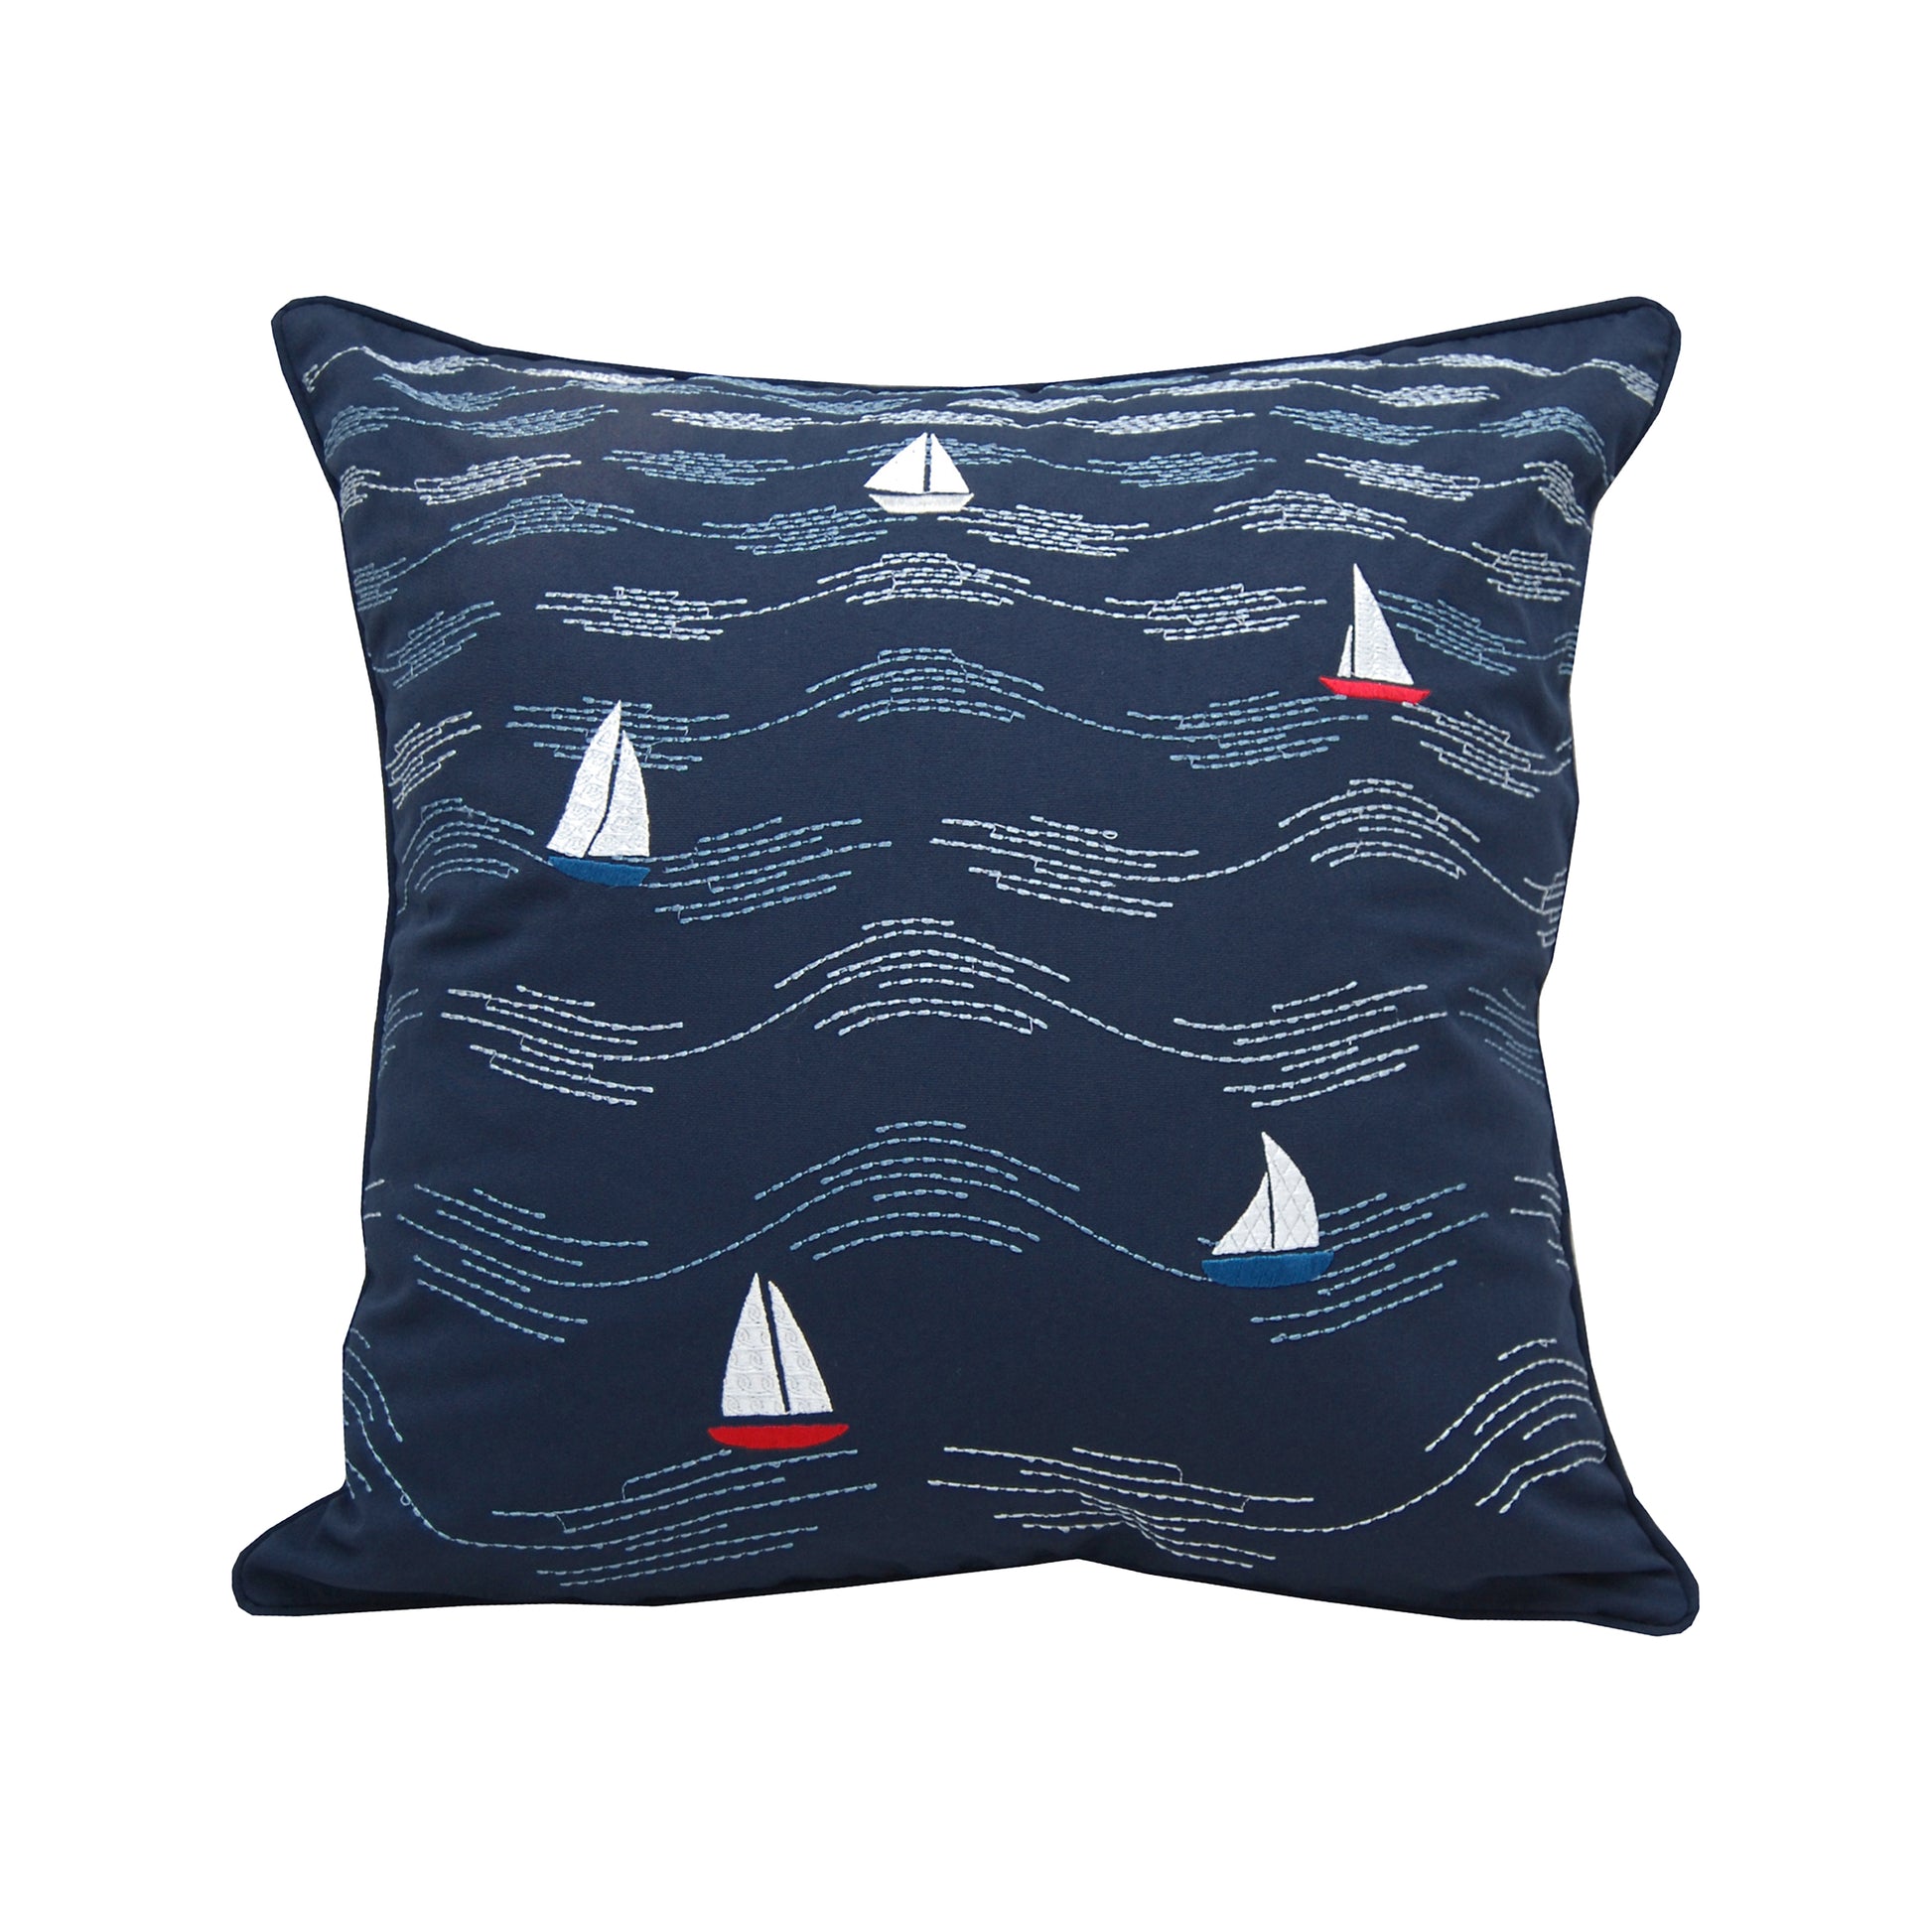 Five sailboats riding modern styled waves are embroidered on a navy blue background.